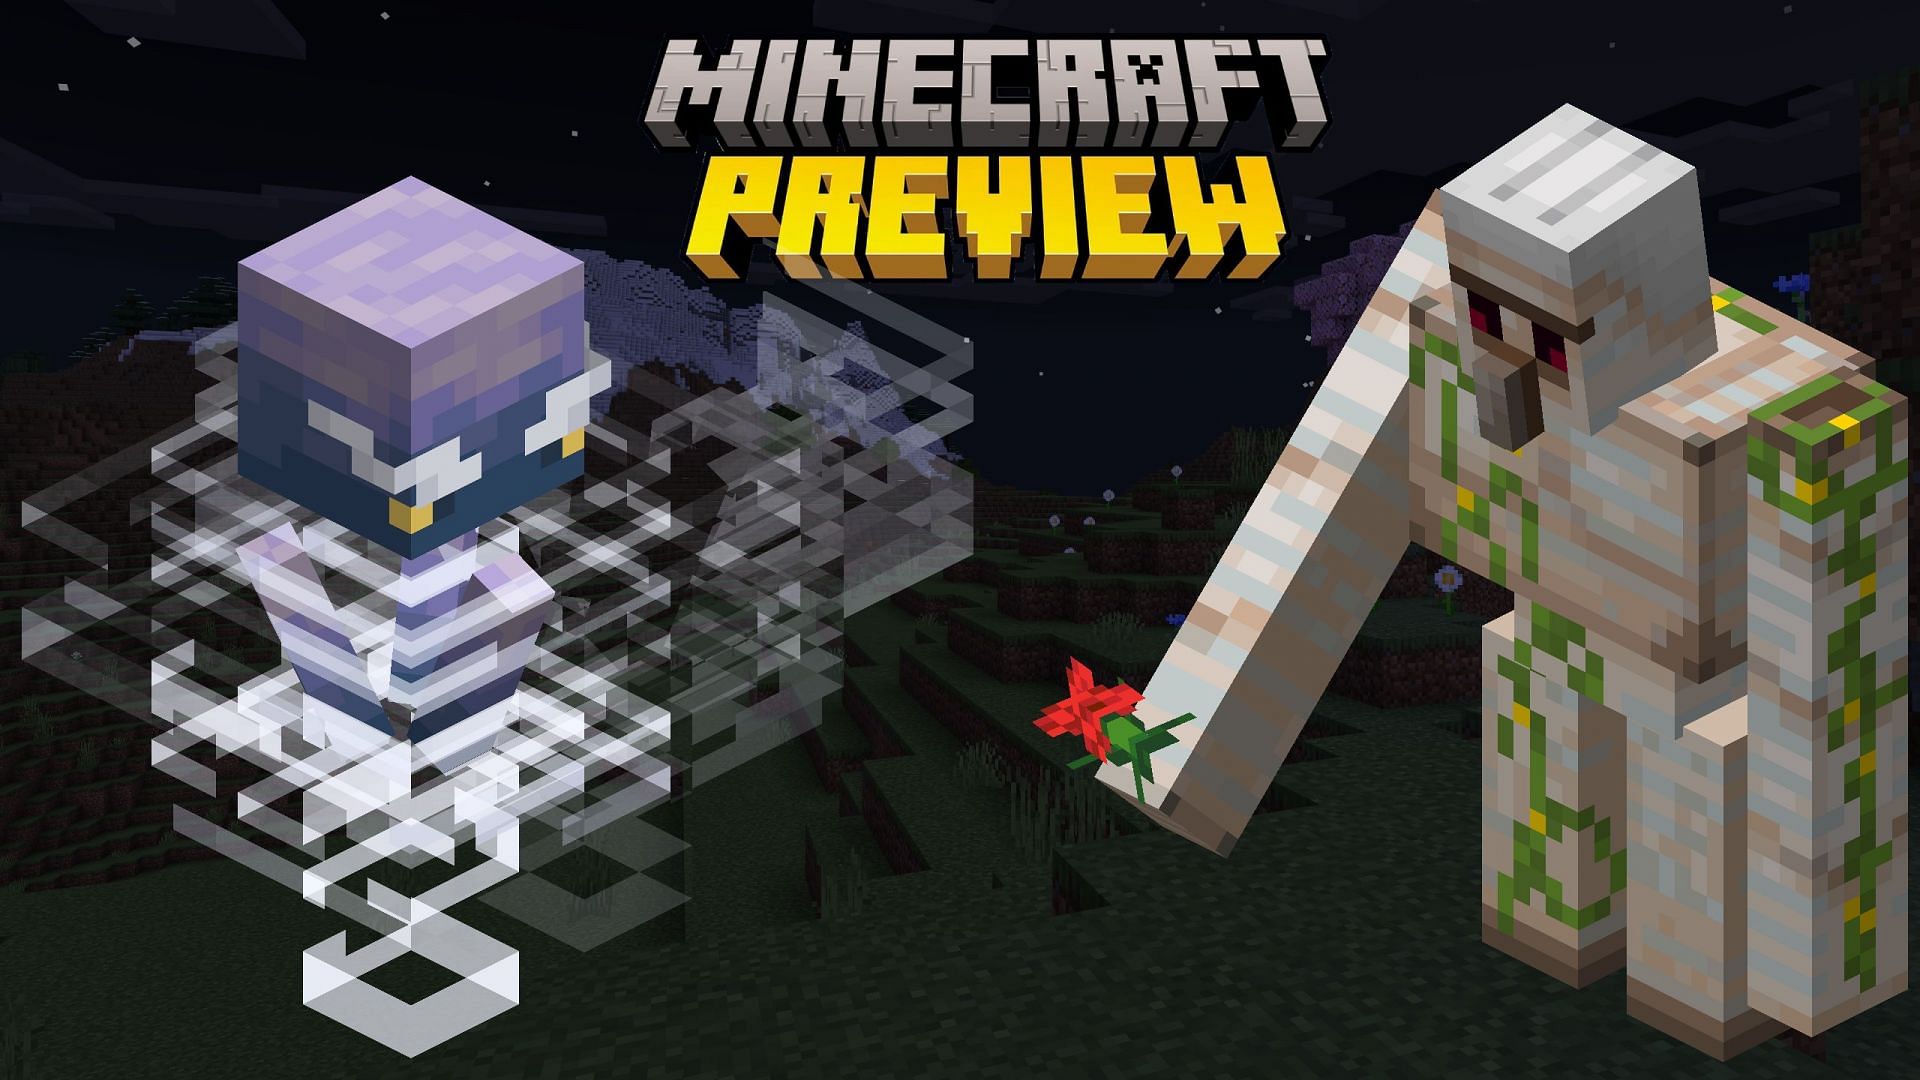 A Breeze and an Iron Golem, both which had major updates in the preview (Images via Mojang)